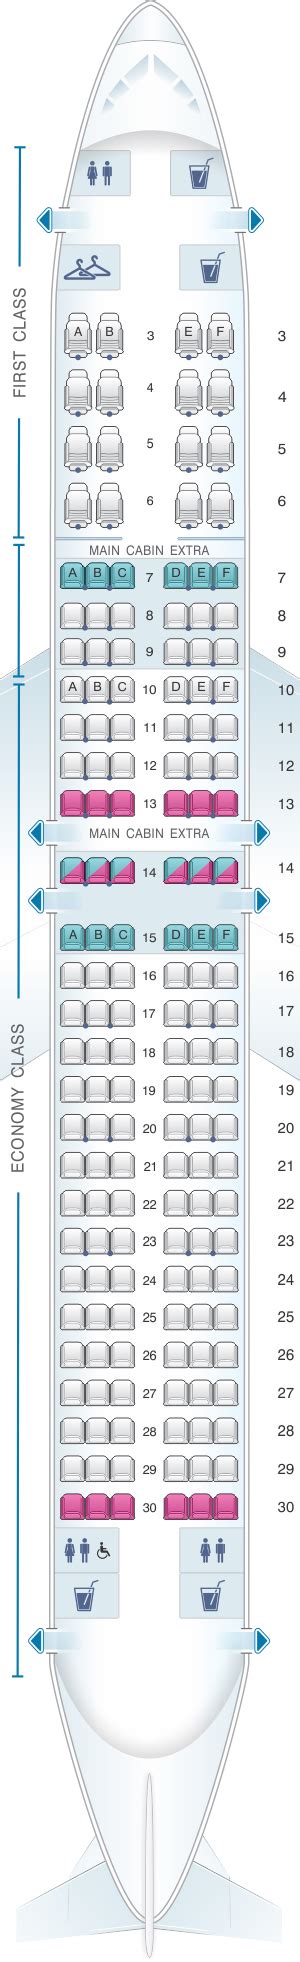 Economy. Standard seat. 31 -32. 17. 21-46. 150. Find the best seat wiht our Garuda Indonesia Boeing 737-800 (738) v1 seating chart. Use this seat map to get the most comfortable seats, legroom and recline before booking.. 